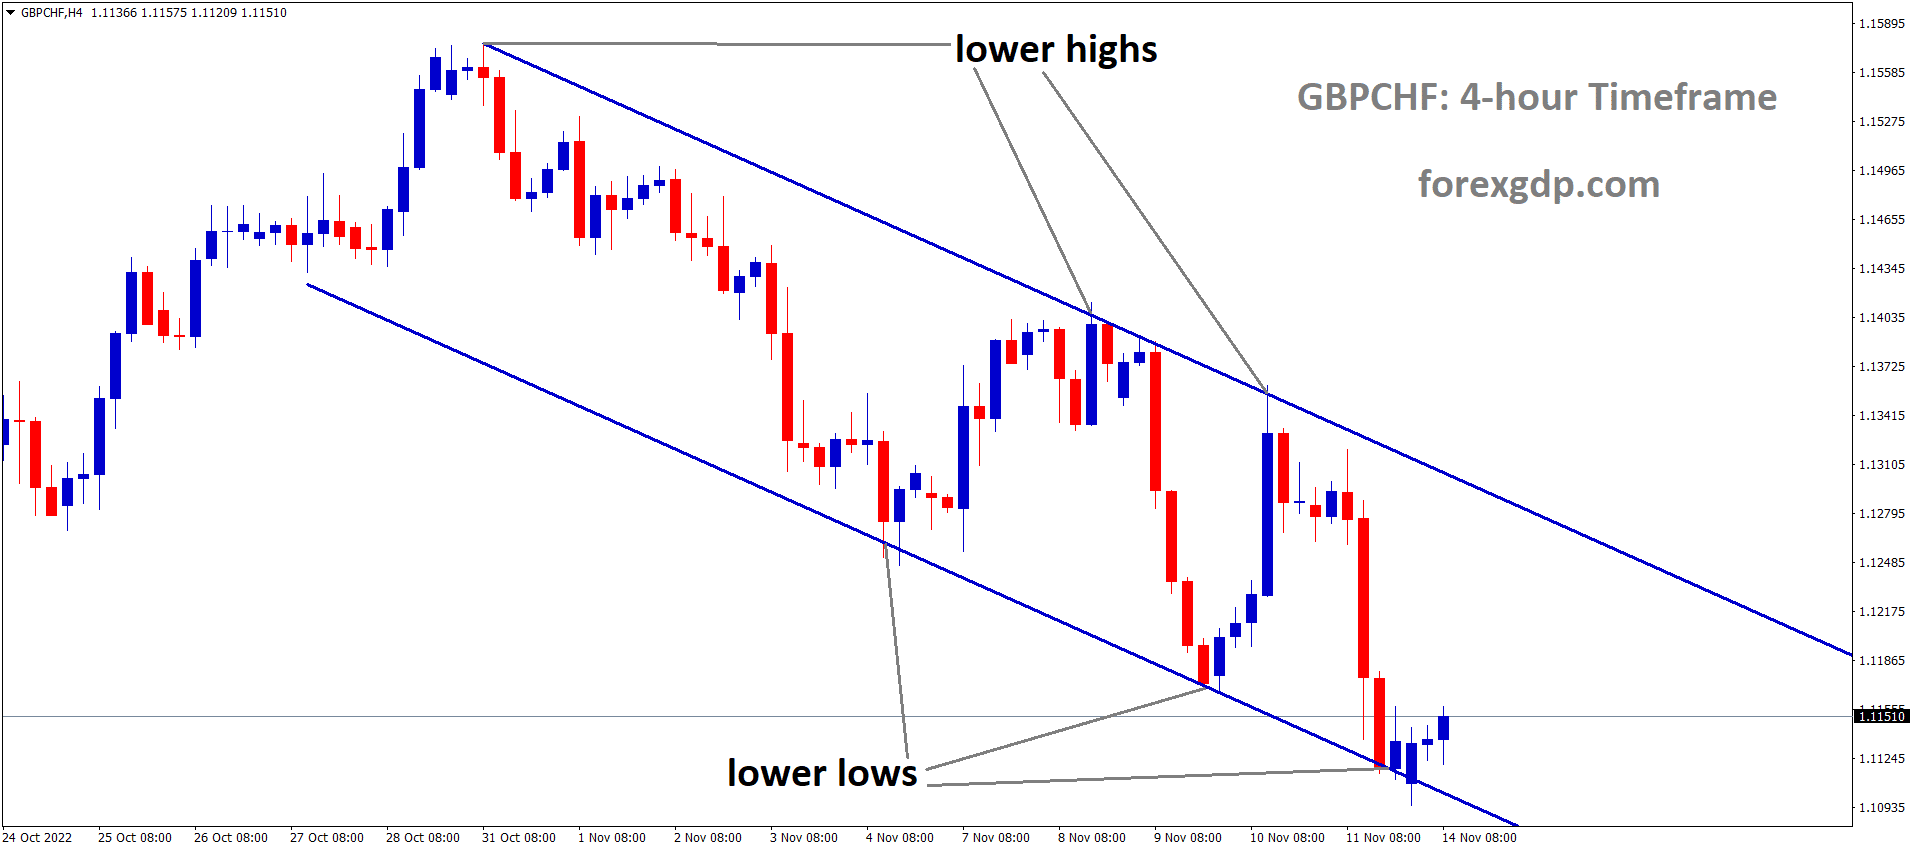 GBPCHF is moving in the Descending channel and the market has rebounded from the lower low area of the channel 1